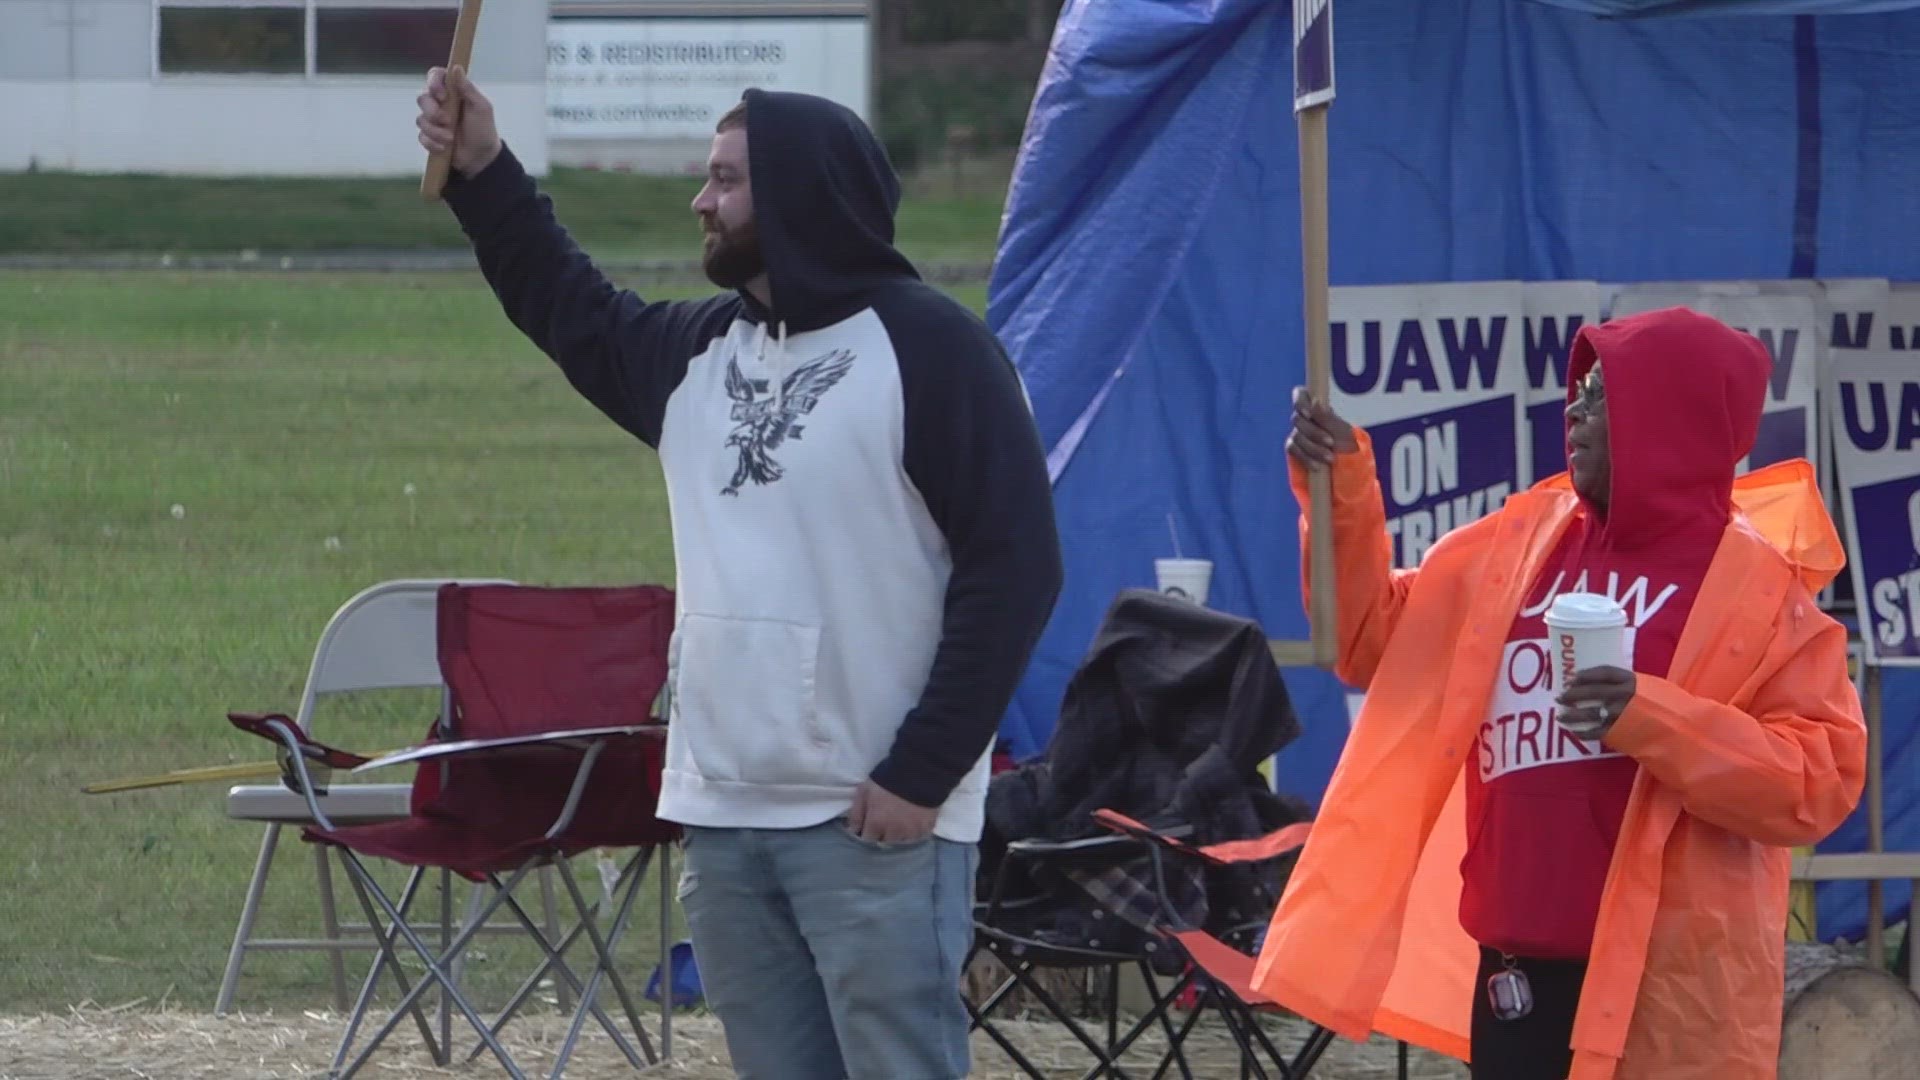 Workers at the Streetsboro Stellantis plant have been on strike for four weeks, one week behind others at the UAW.